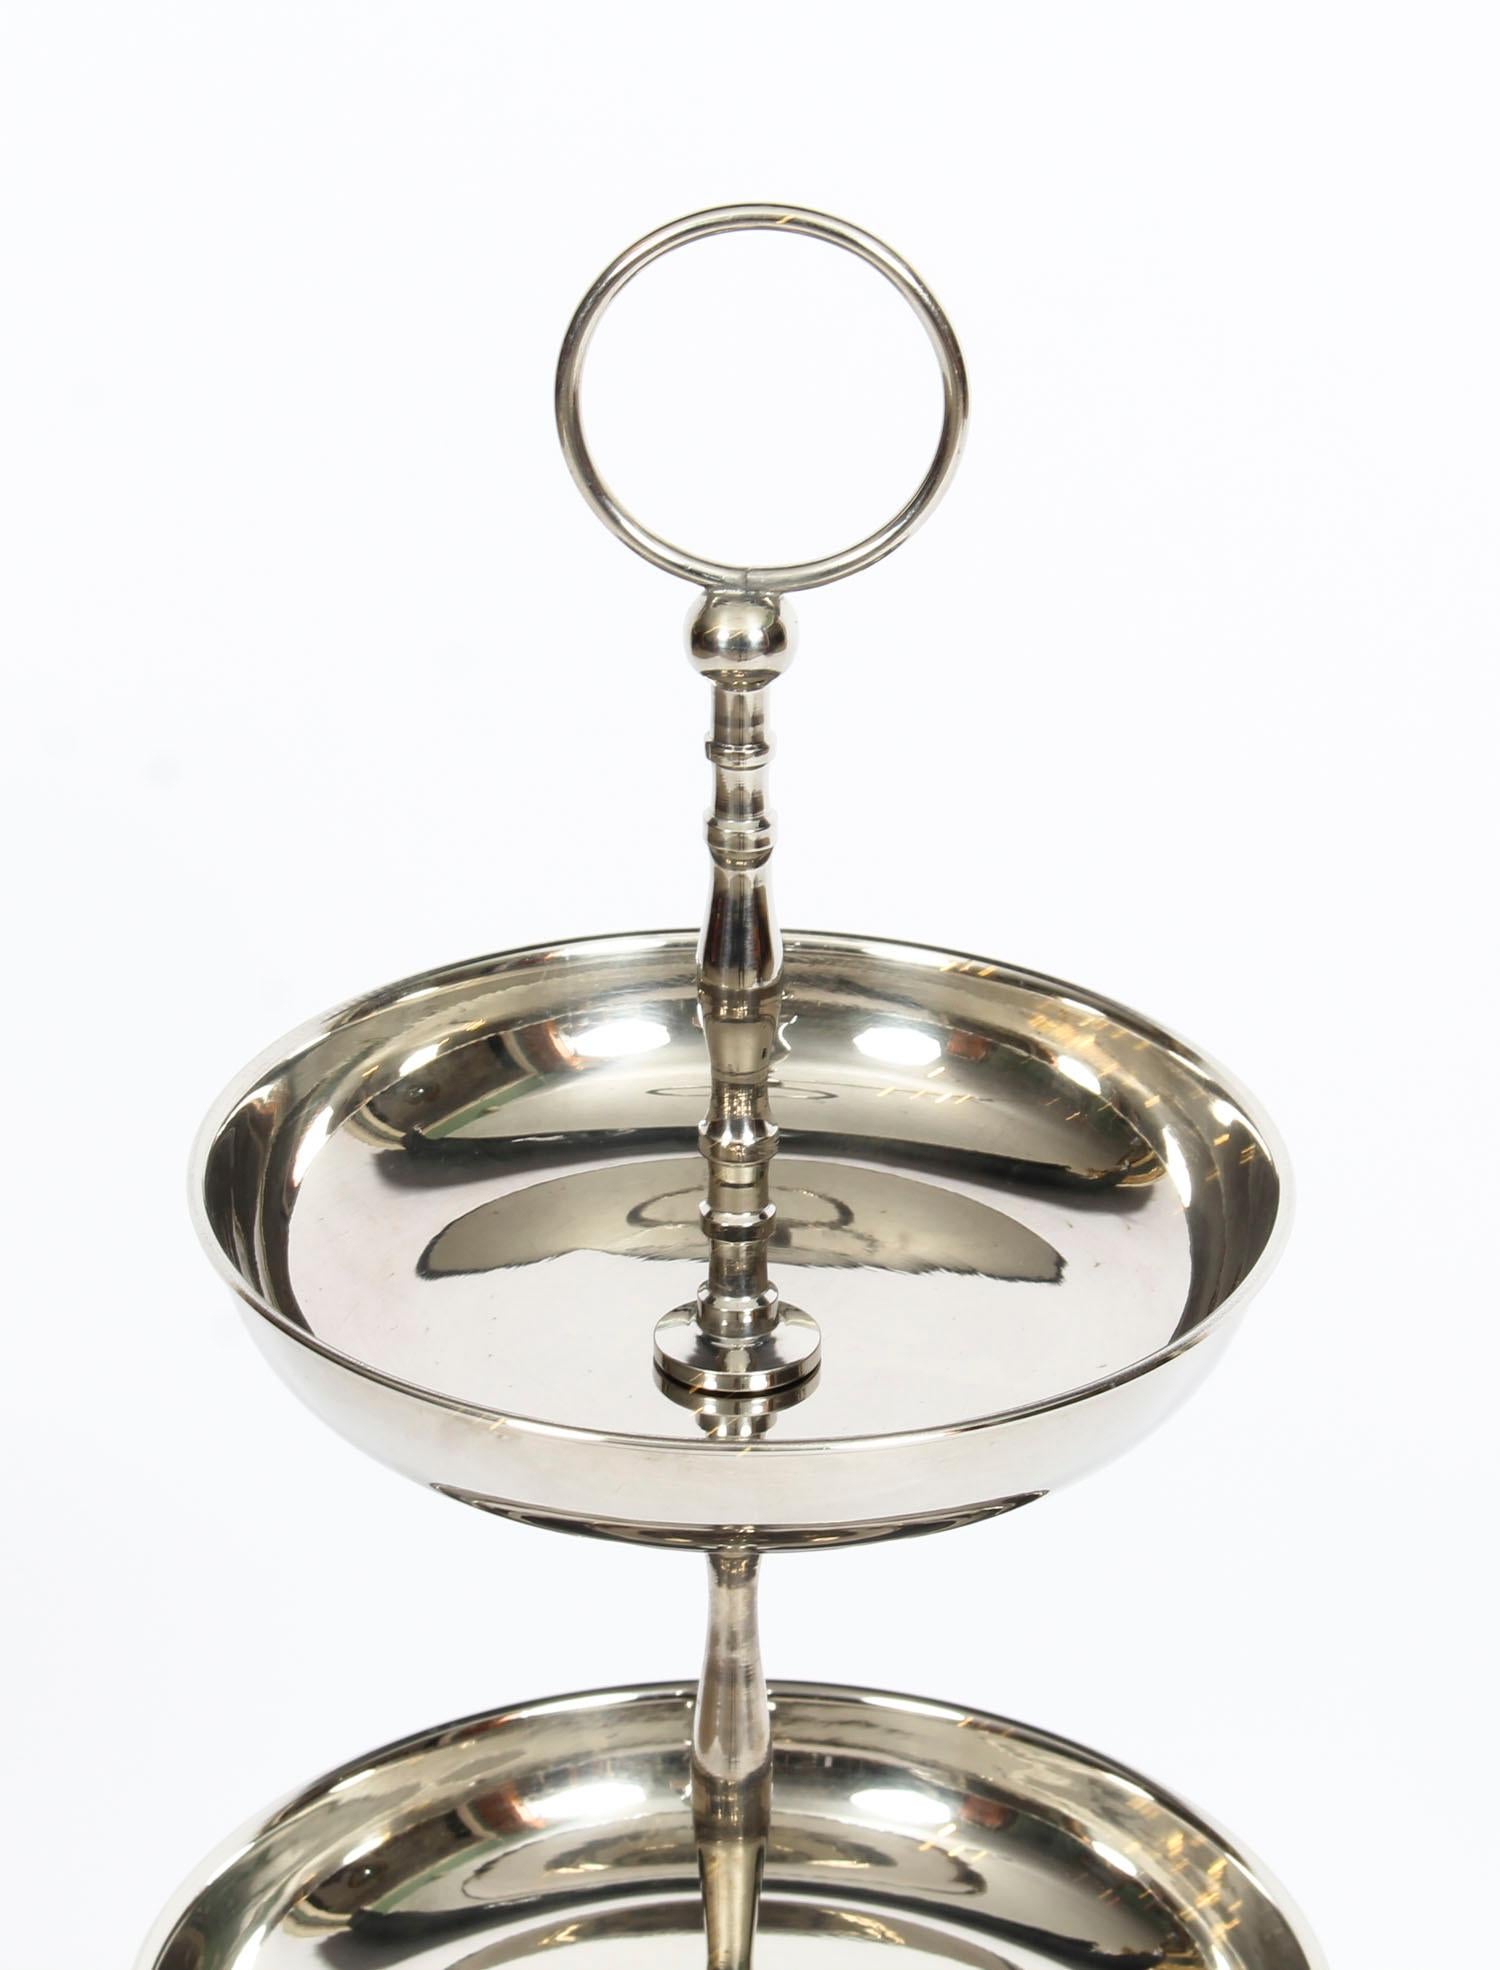 Mid-20th Century Vintage Silver Plated Cake or Confectionary Stand, 20th Century